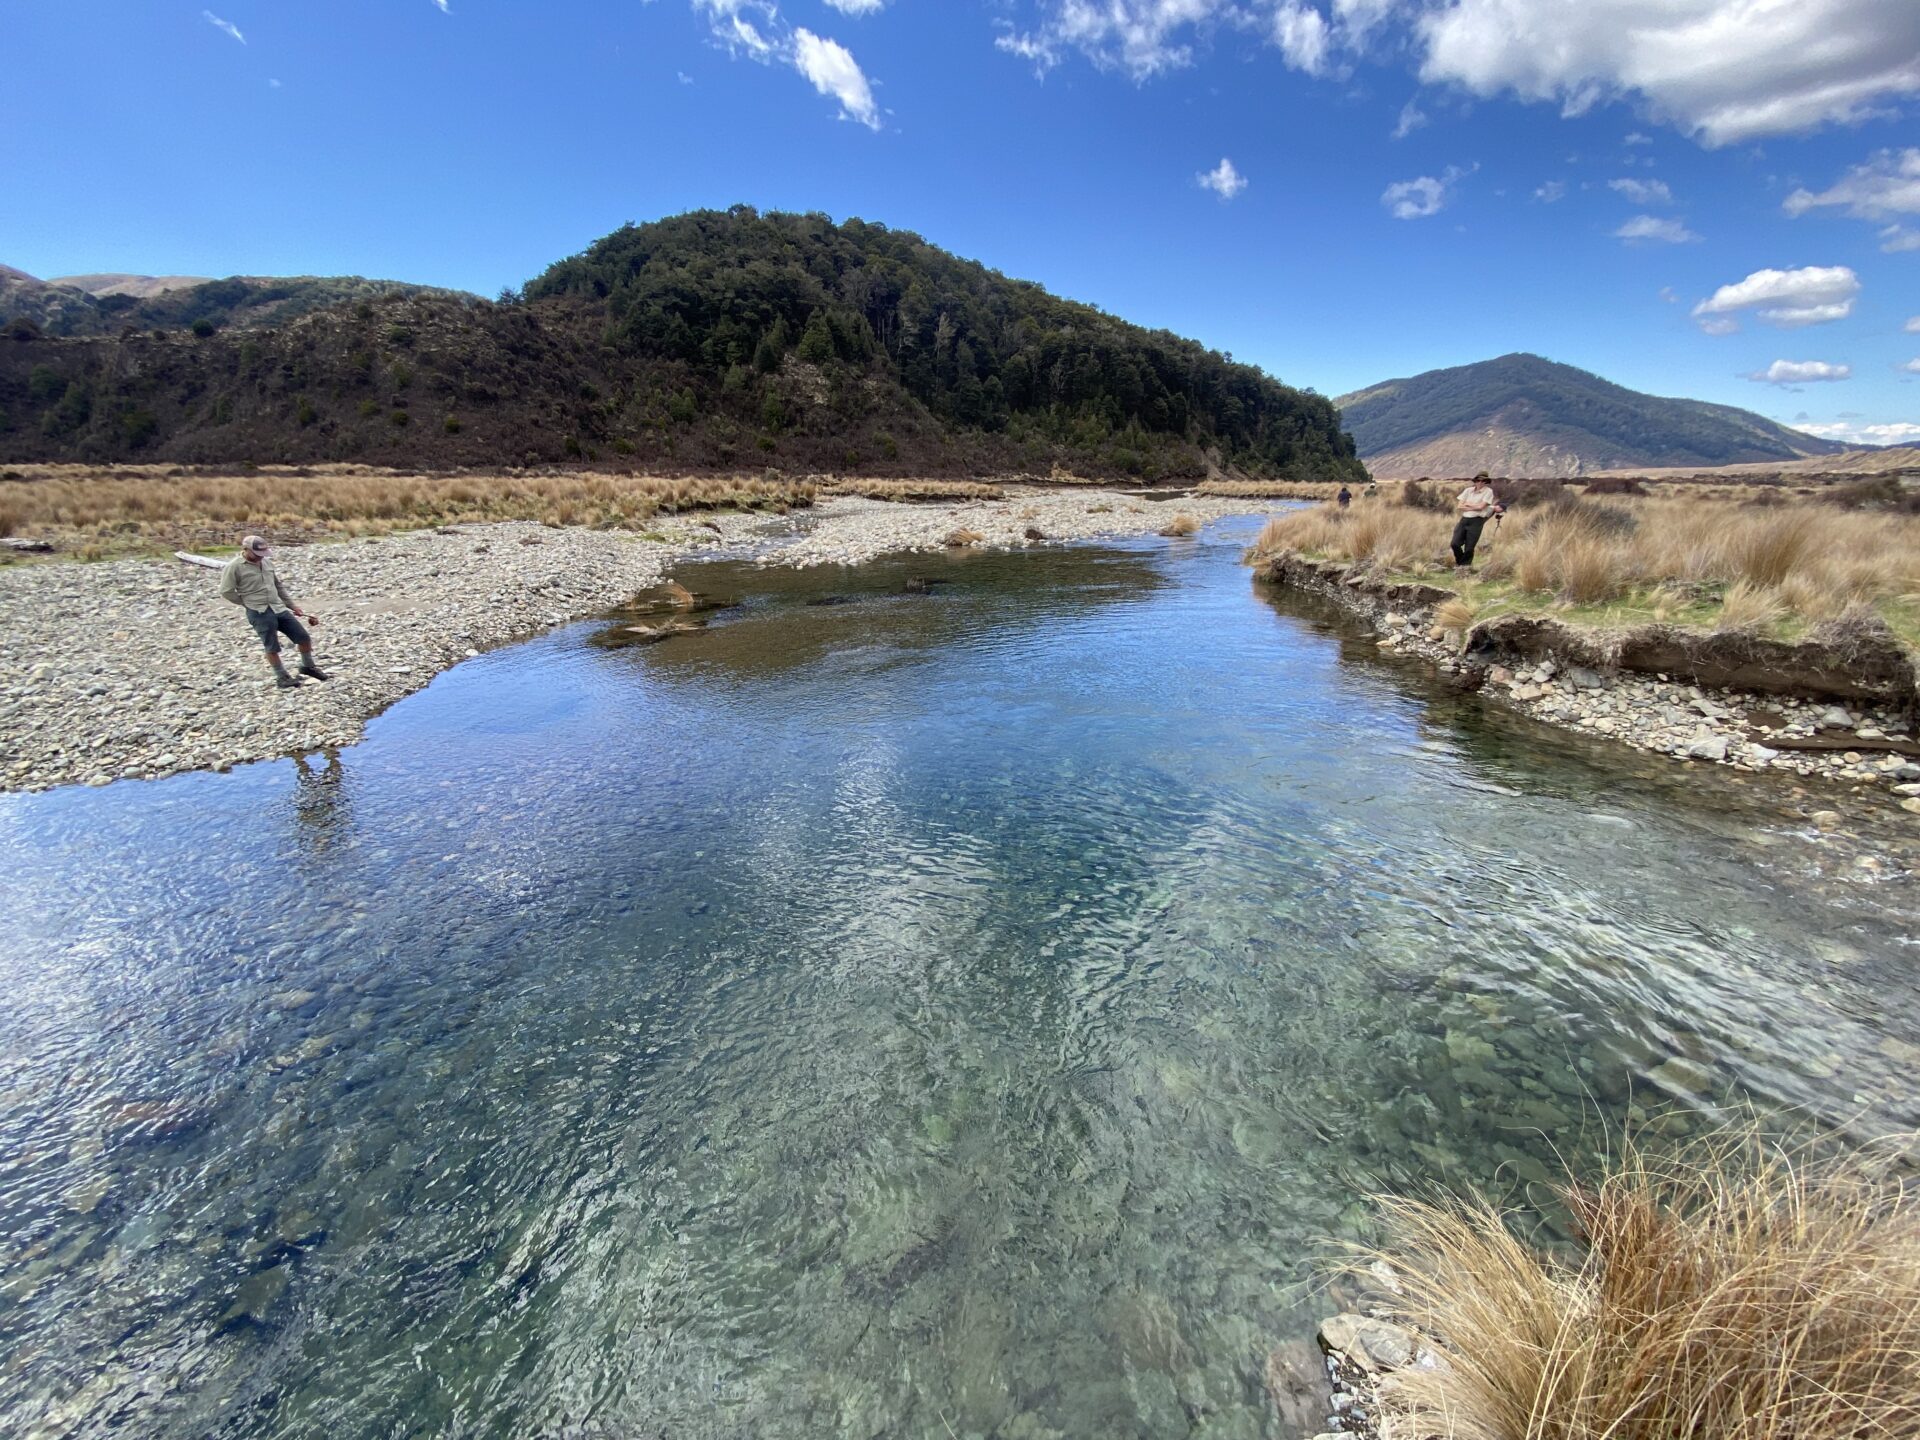 If you're looking to explore some of the best trout fishing spots in the area, a full day trip with an Orvis endorsed guide is the perfect way to do it.